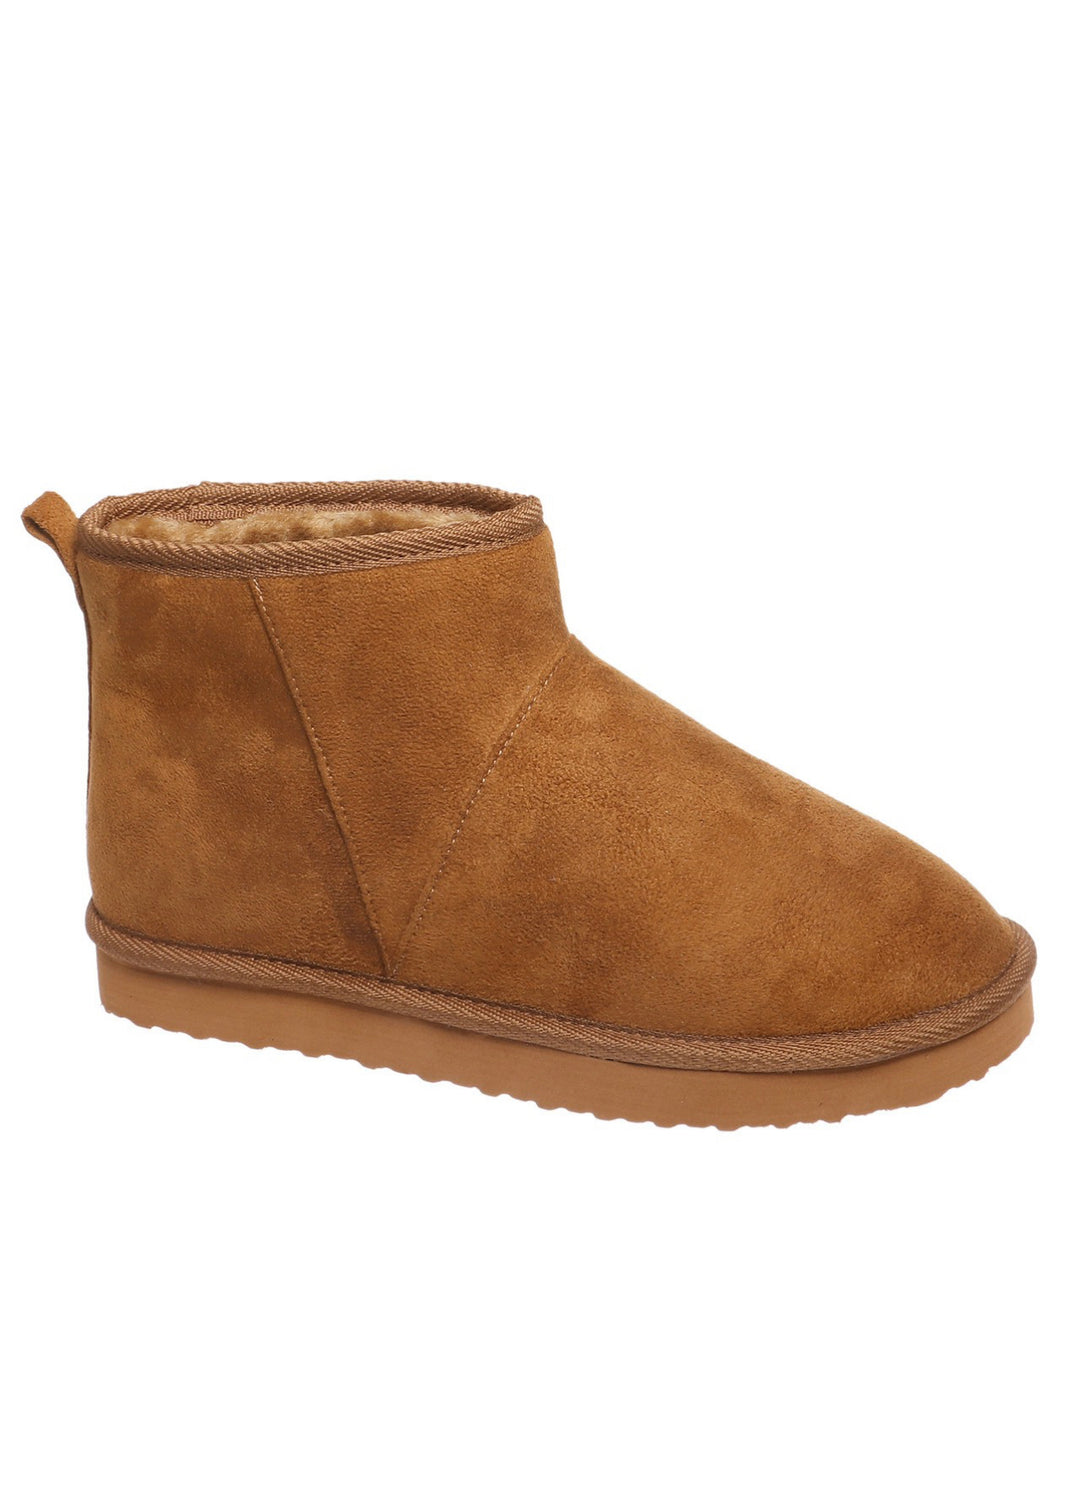 Ugg style Winter Fur Boot